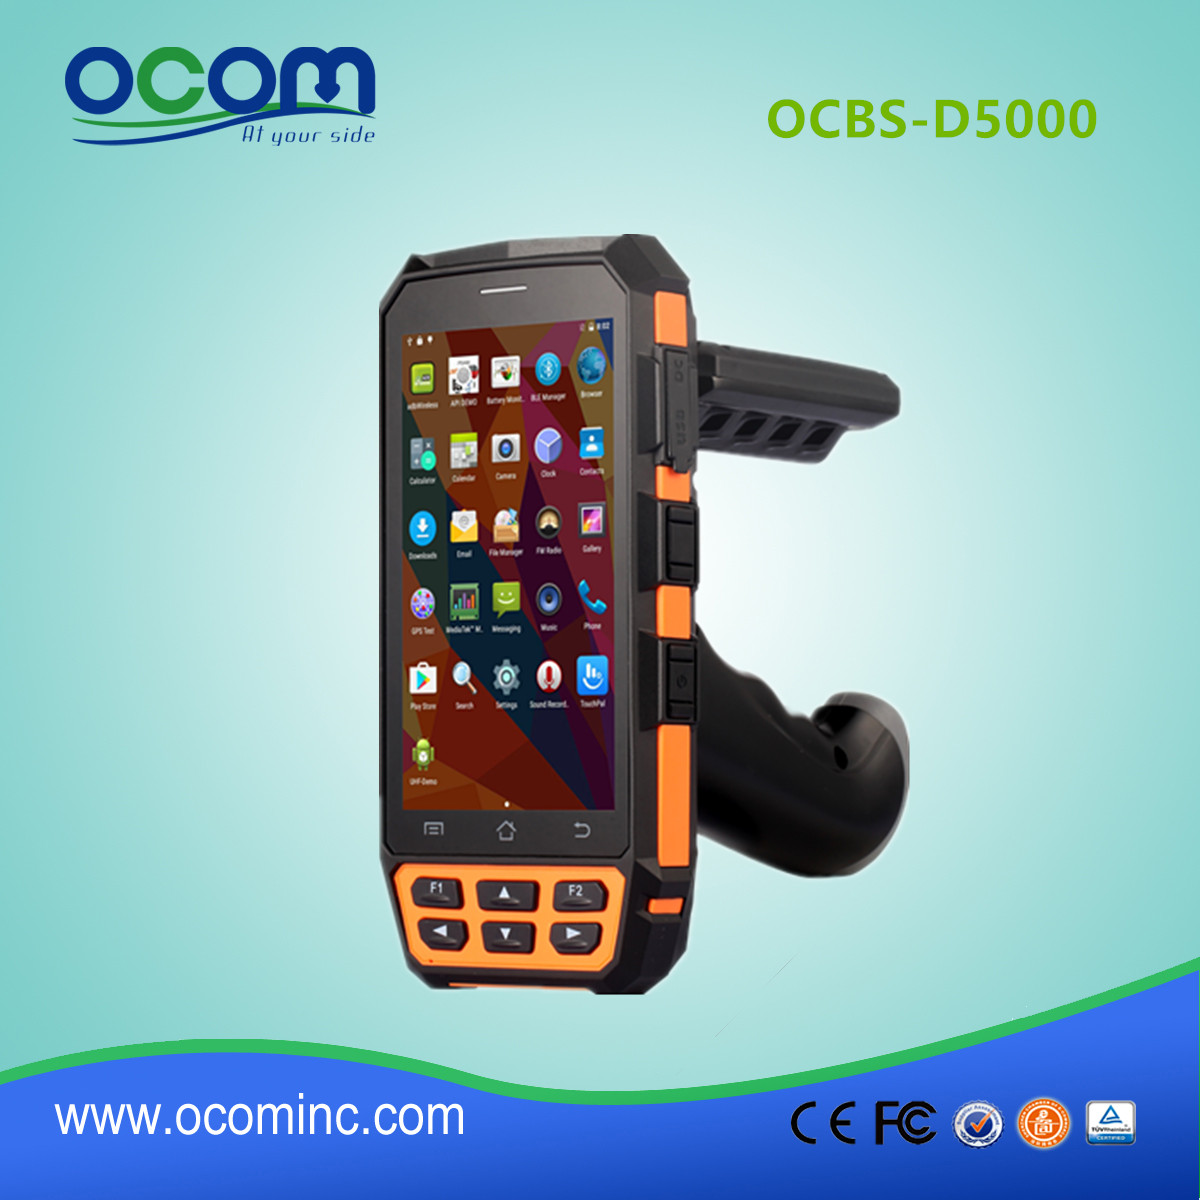 OCBS-D5000 courier qr κωδικός σαρωτή android pda με λαβή πιστόλι